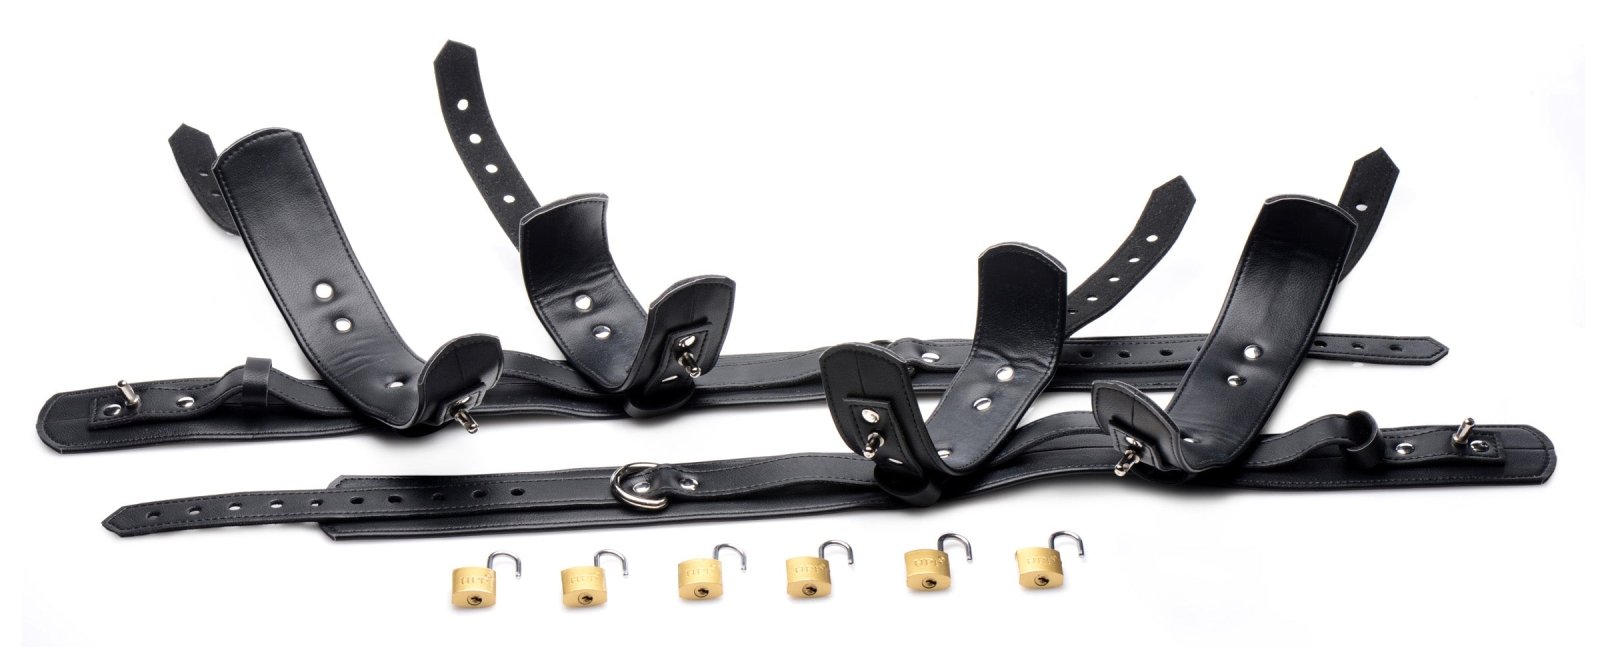 Frog-Tie Wrist and Ankle to Thigh Cuff Restraint Set - Kink Store